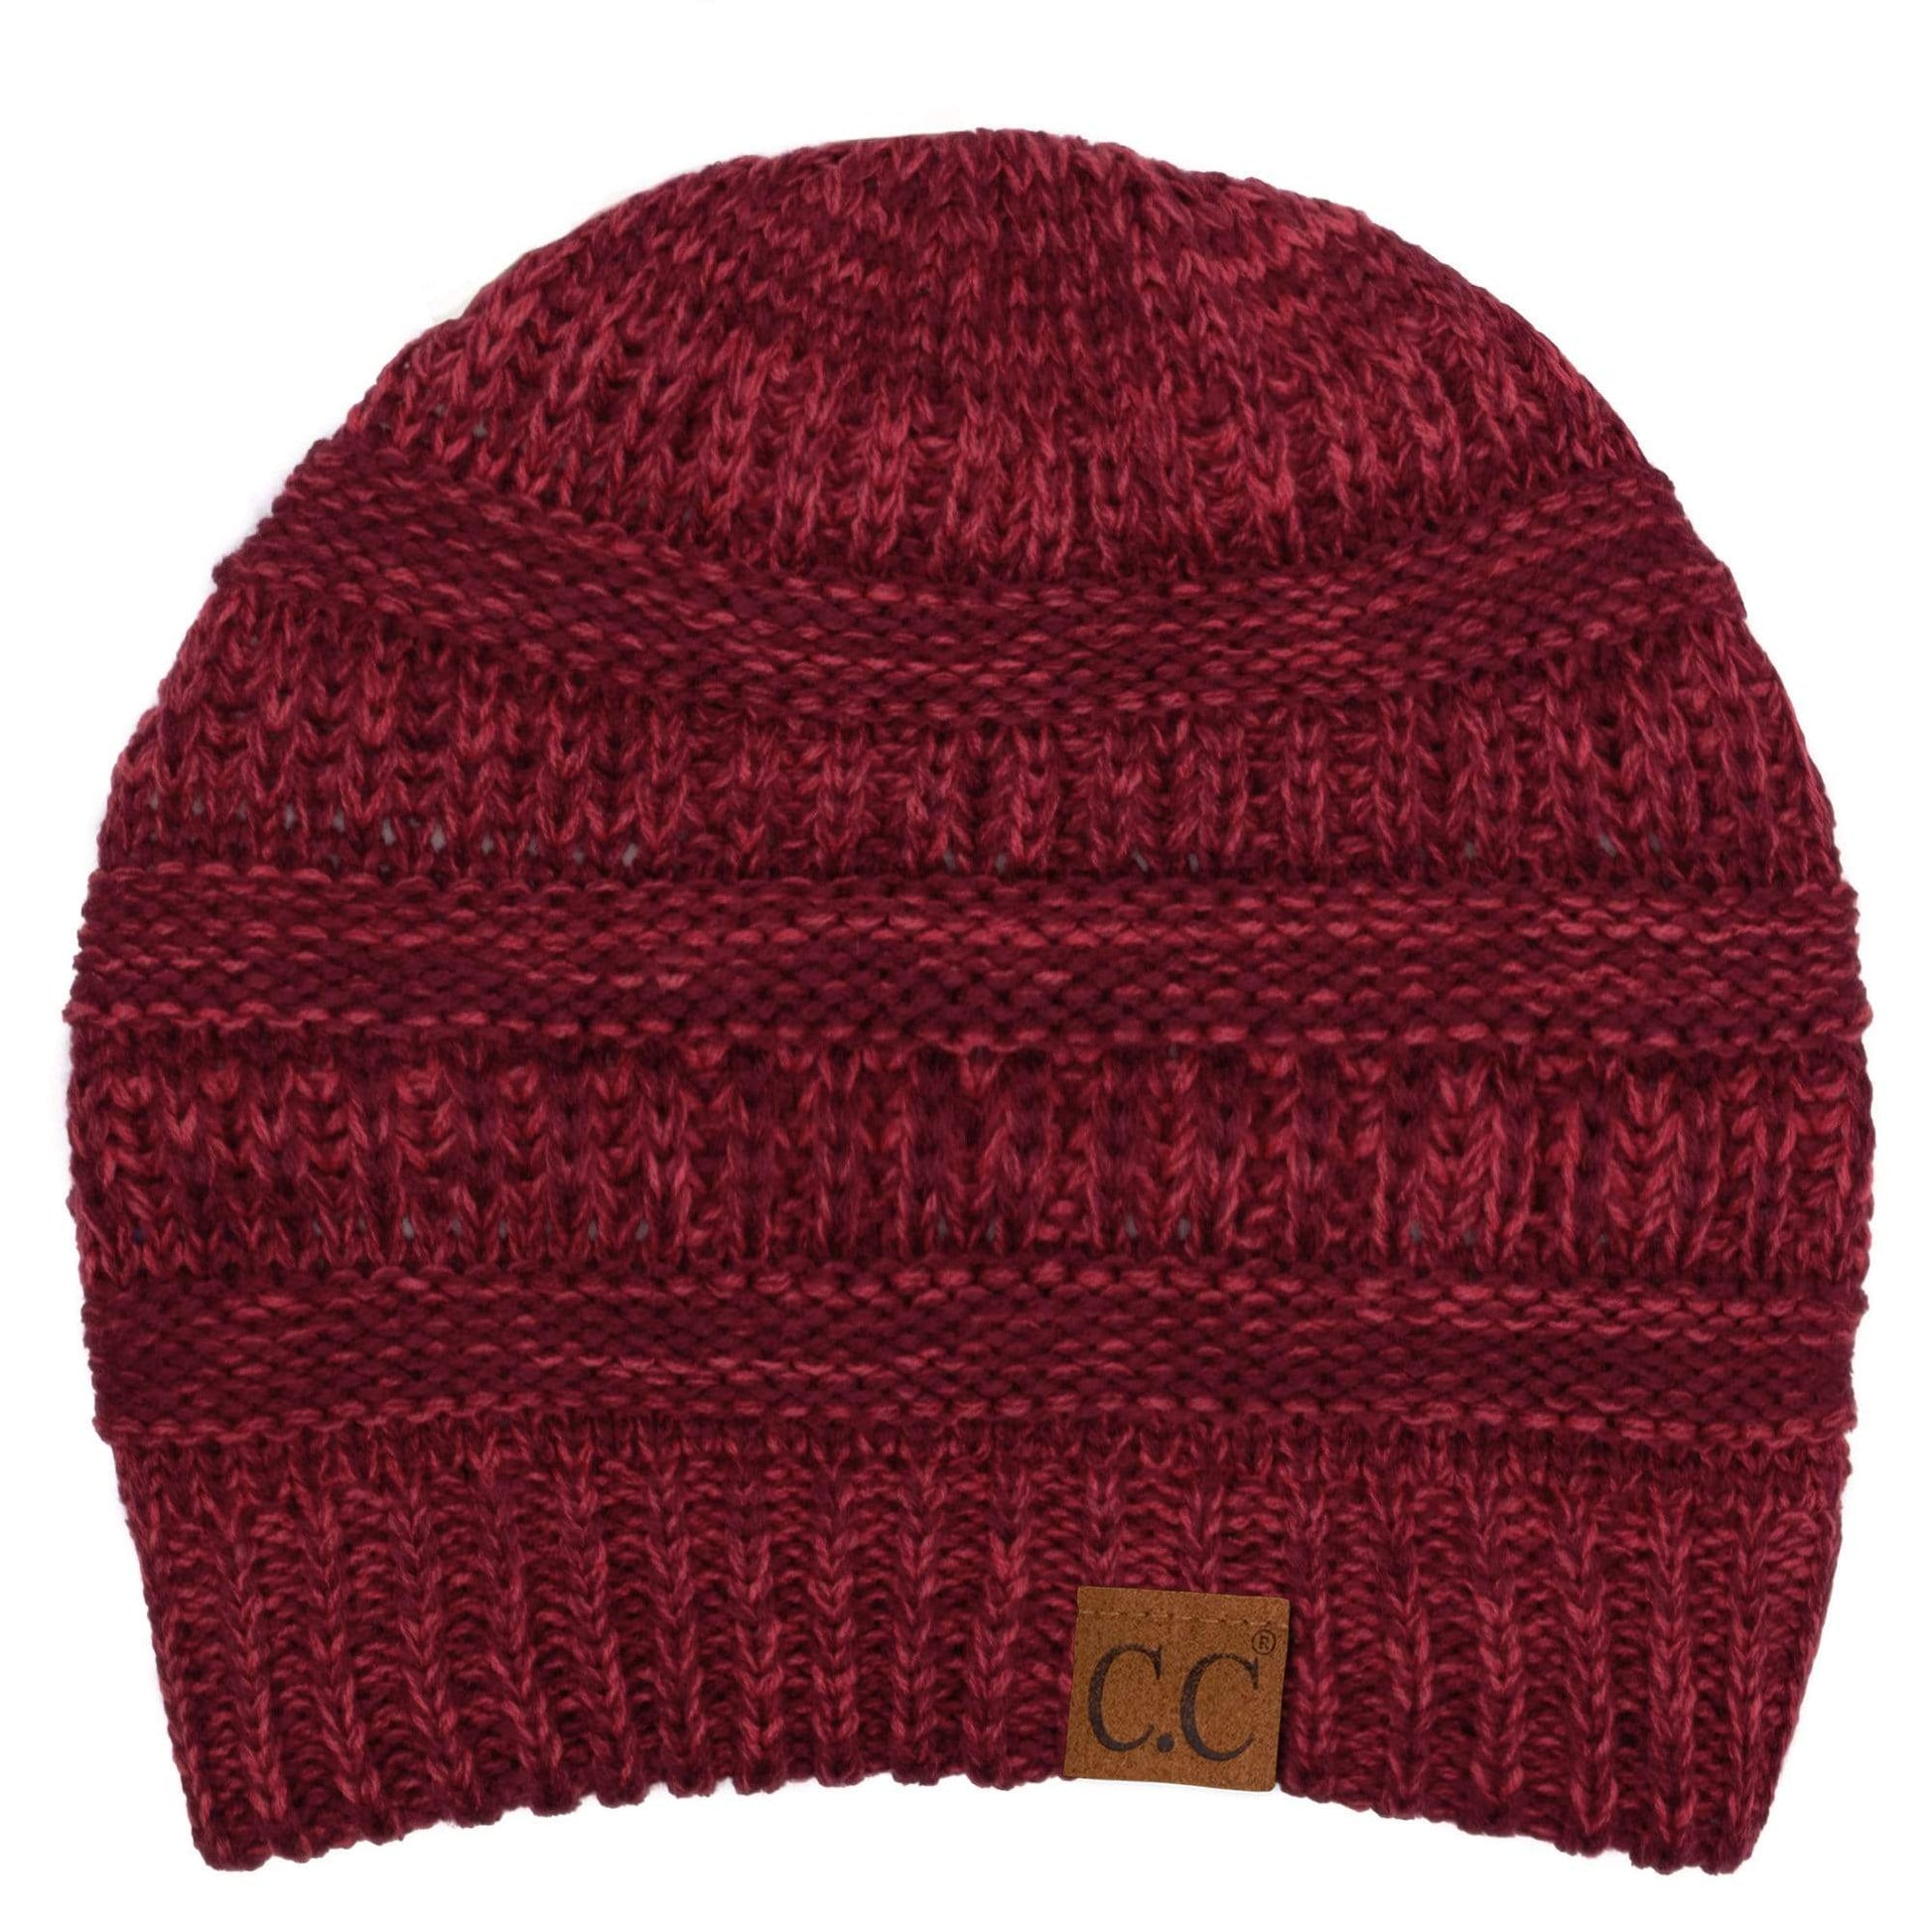 C.C Apparel Two Tone Burgundy C.C Trendy Warm Chunky Soft Stretch Two-Toned Cable Knit Beanie Skully